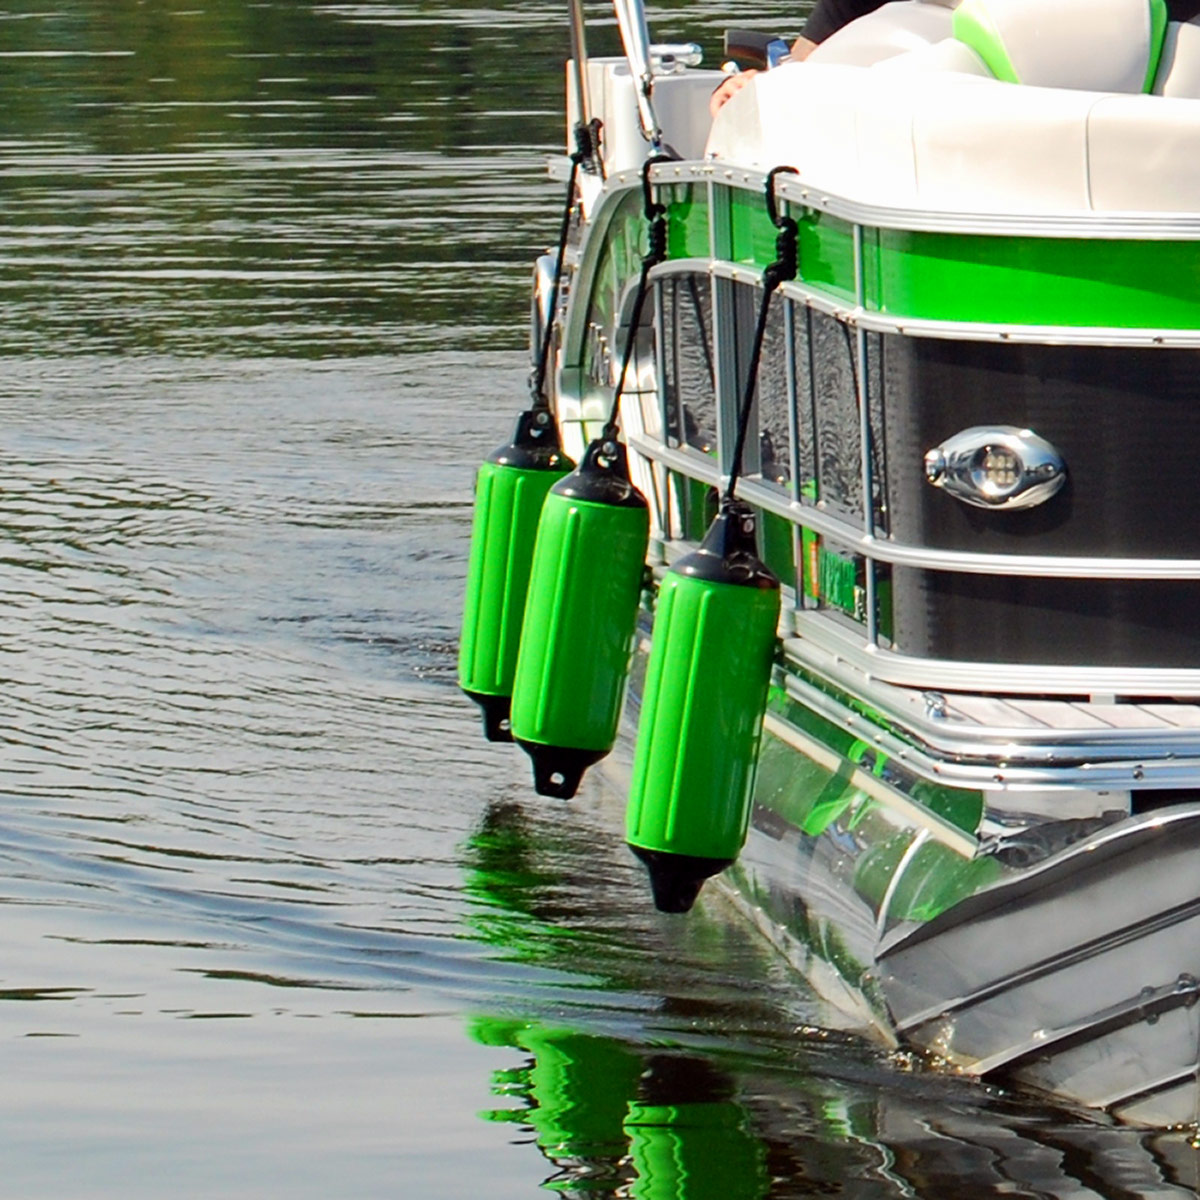 Stylish colors and designs to match every boat